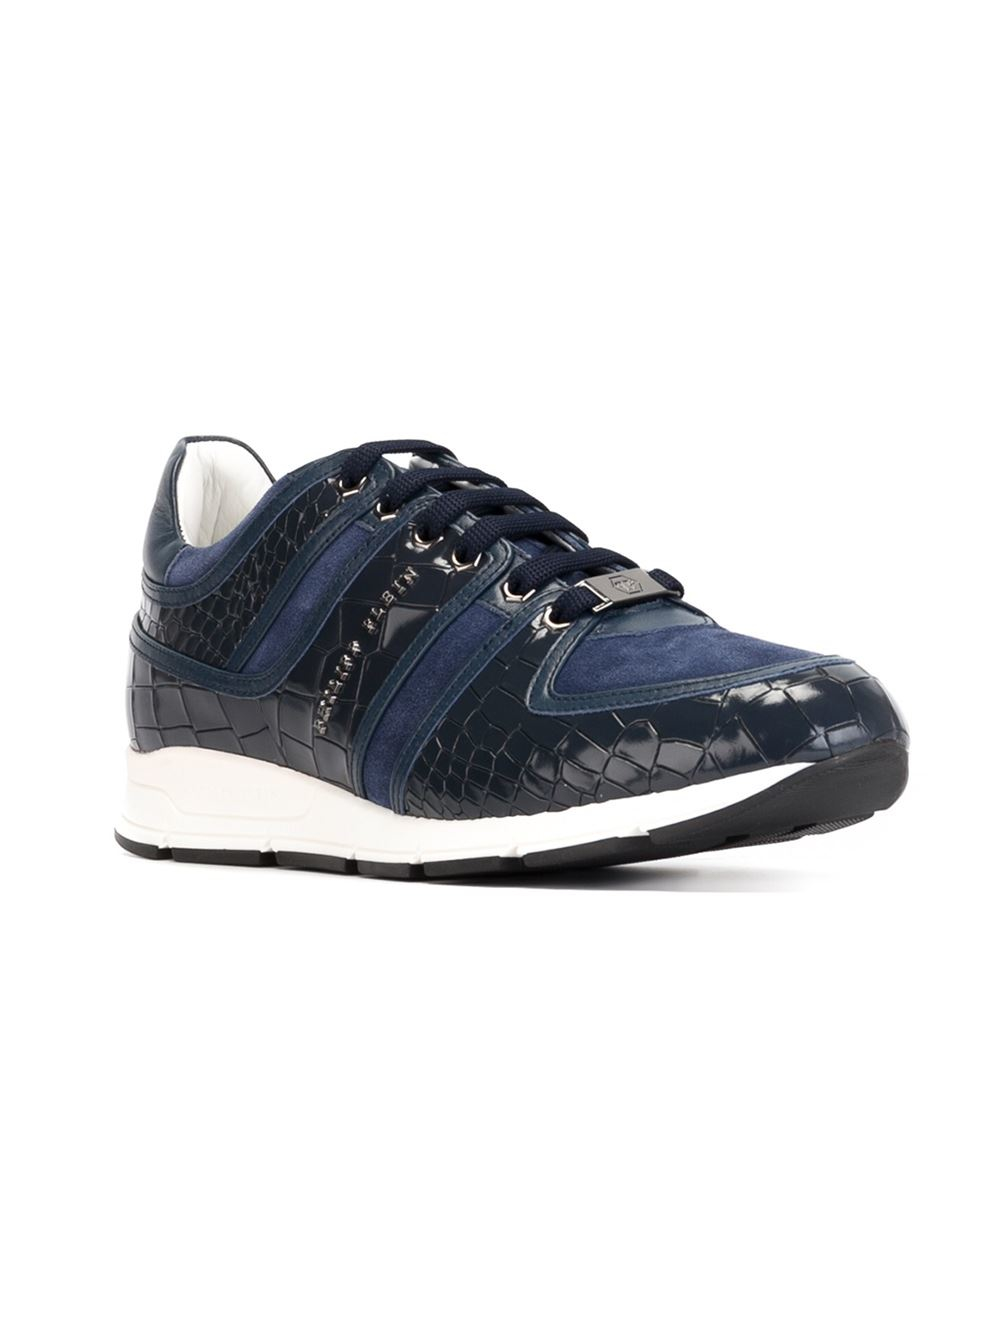 Philipp plein Not Me Leather and Suede Sneakers in Blue for Men | Lyst